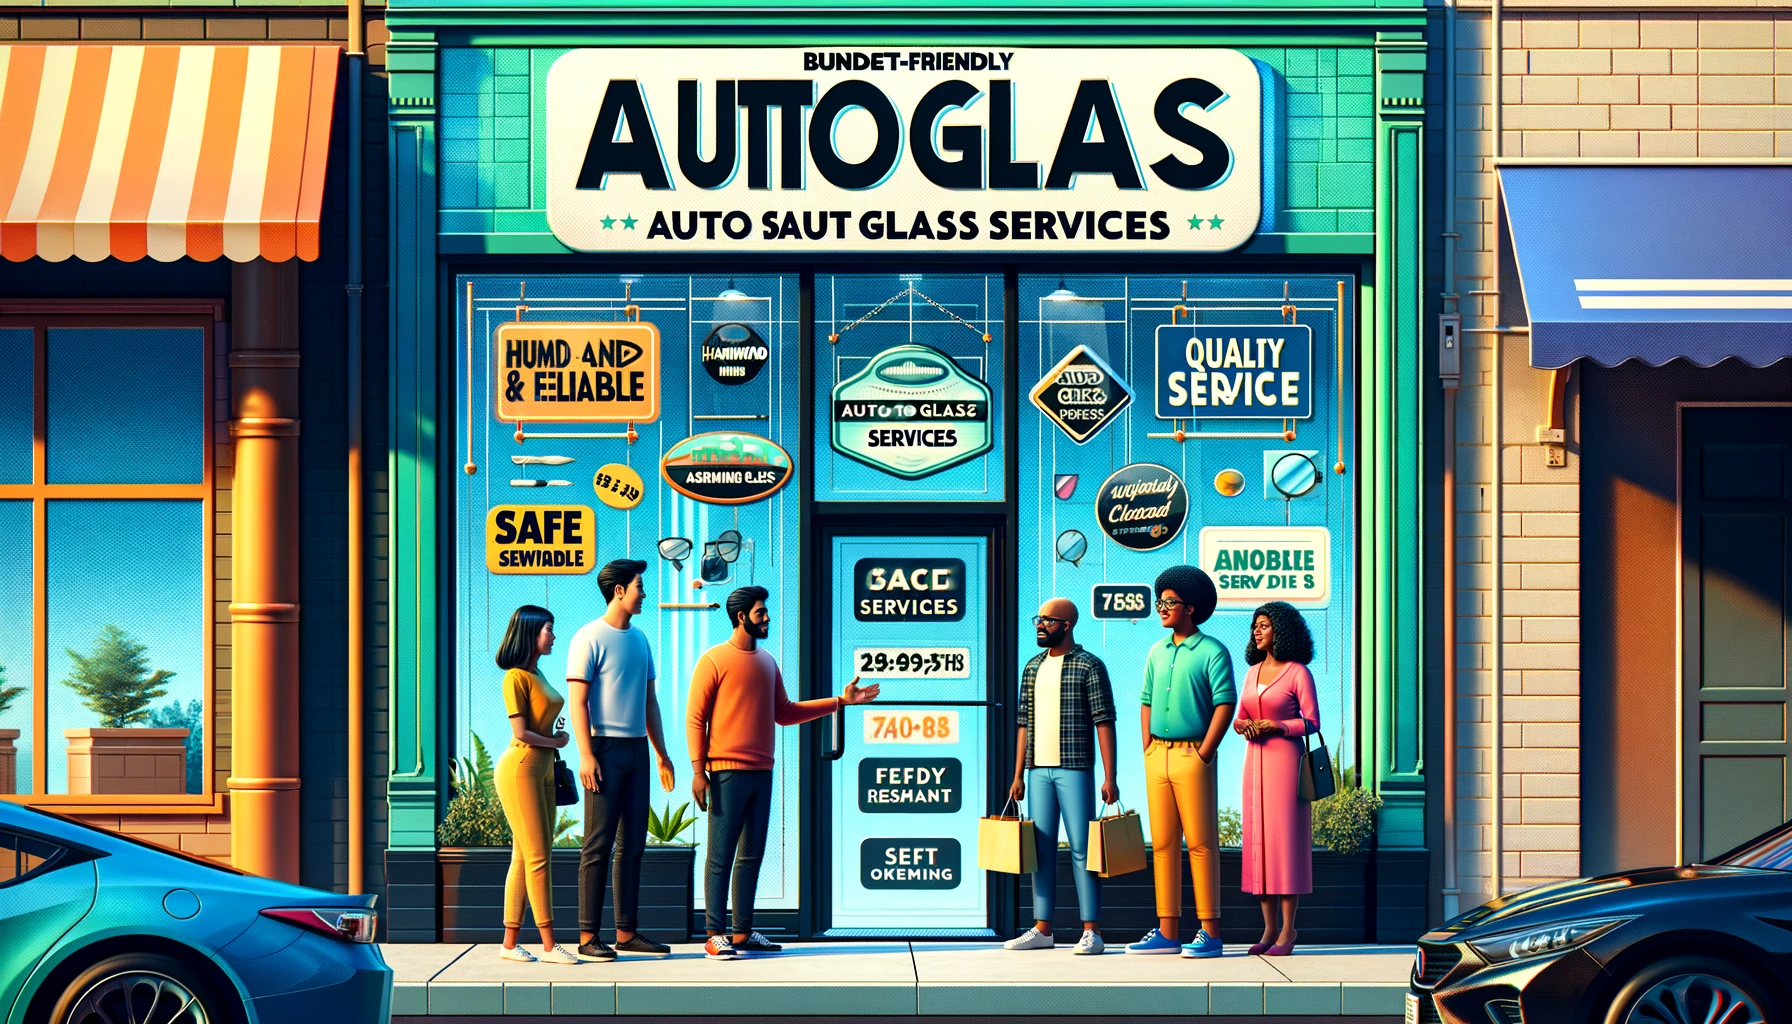 The vibrant storefront of 'Hammond's Budget-Friendly Auto Glass Services', featuring a modern design with large windows displaying auto glass types. A banner reads 'Safe and Reliable Services at Affordable Prices'. A diverse group of customers, including a South Asian man and a Middle-Eastern woman, are greeted by a Black female employee. The clean and inviting exterior displays signs promoting budget-friendly and quality services.